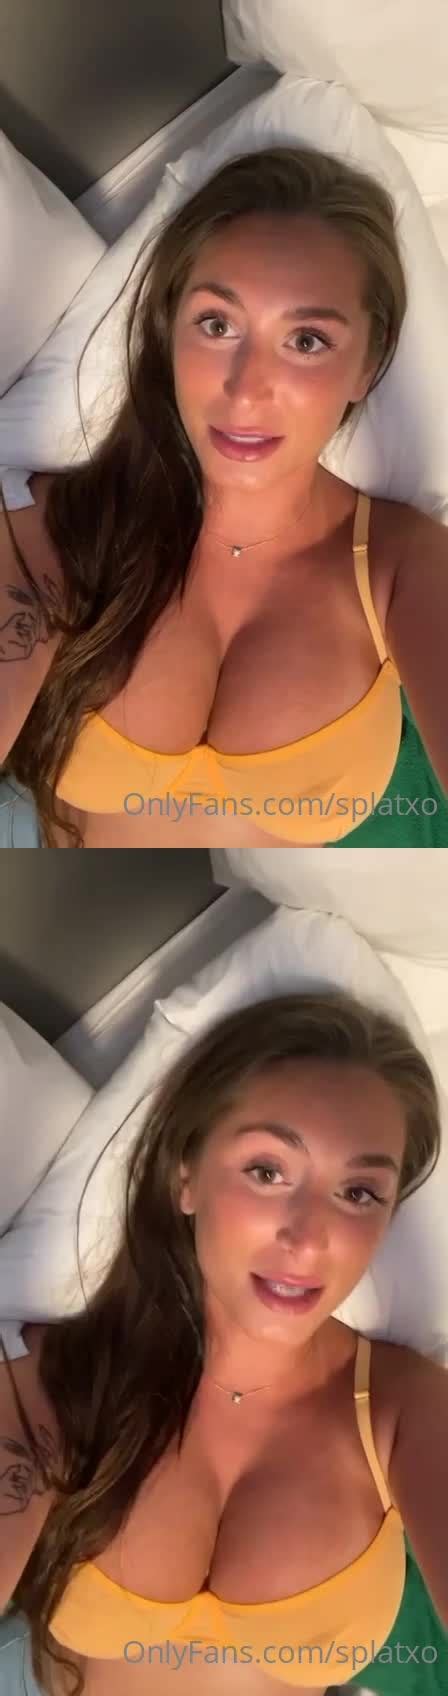 Ruby Reid Aka Splatxo Natural Tits And A Big Natural Ass Will Not Leave